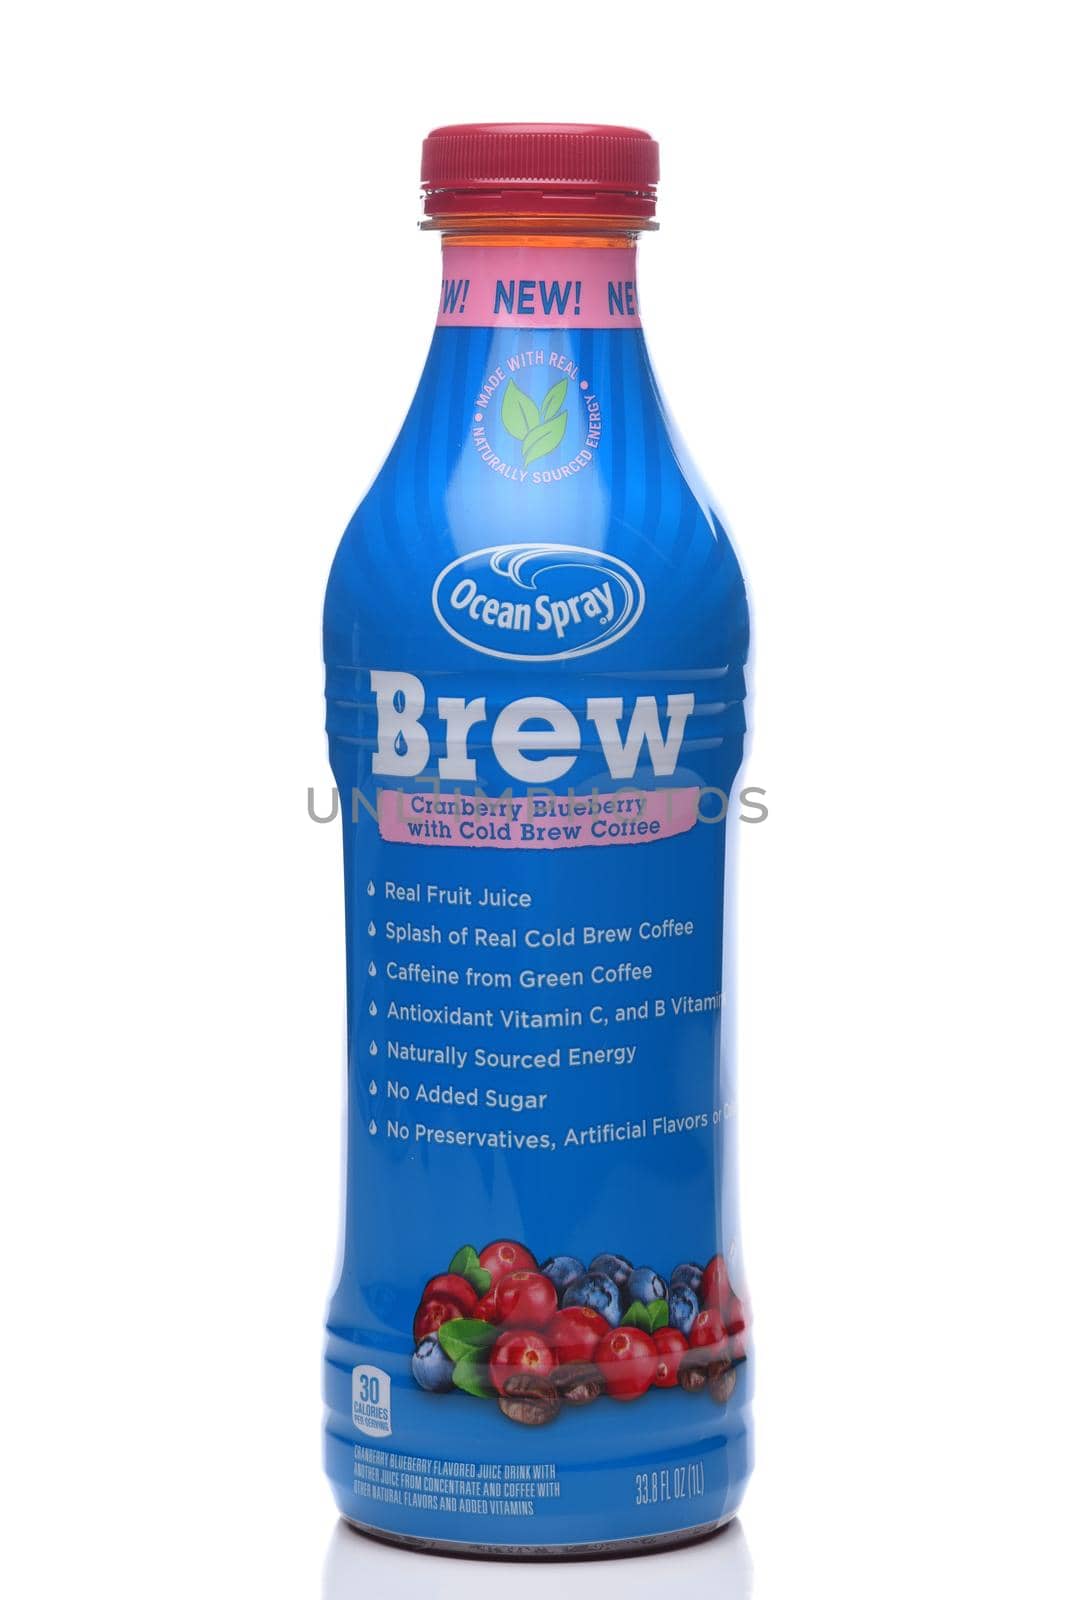 IRVINE, CALIFORNIA - 8 JUNE 2020: A bottle of Ocean Spray Brew, a Cold Brew Coffe with Cranberry and Blueberry flavoring.